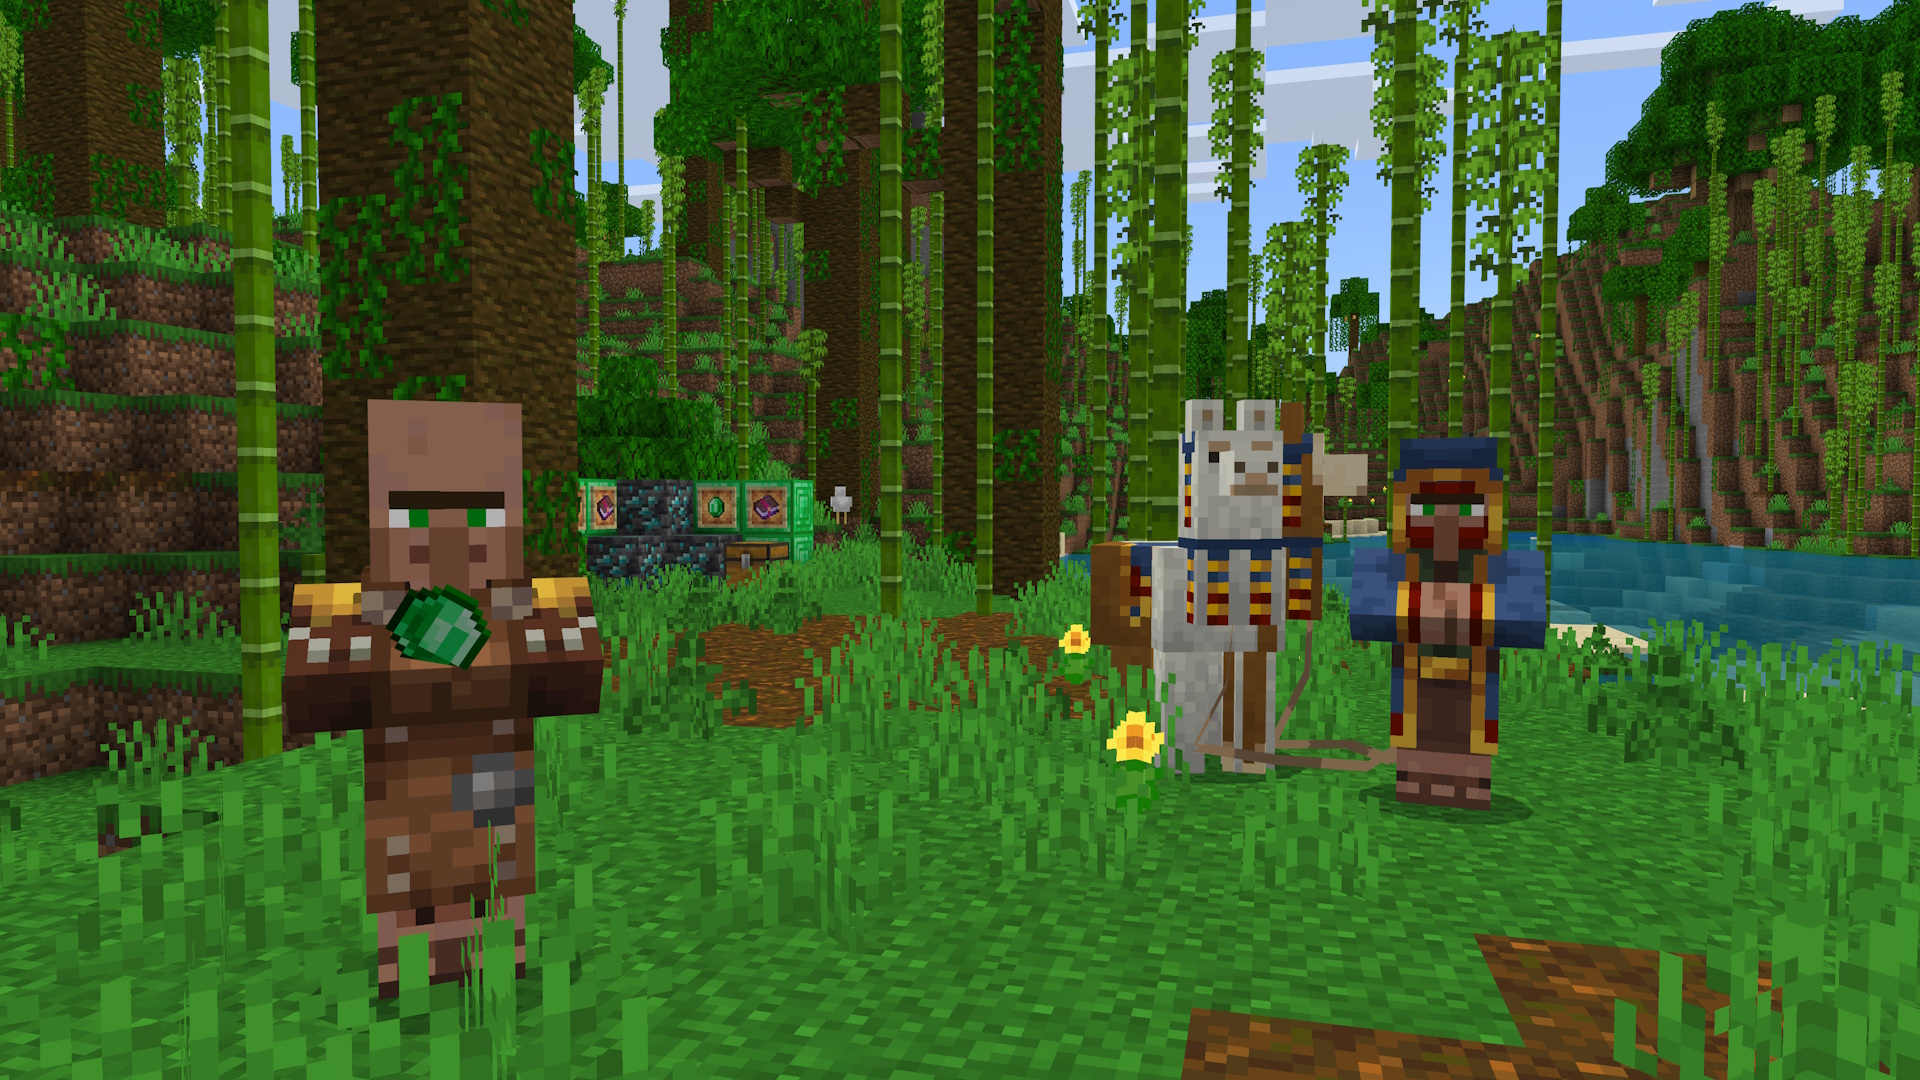 A Minecraft screenshot featuring a villager holding an emerald and a wandering trader with llamas in tow. They are in a Jungle biome near a river. There are some player placed blocks in the background with a chest and item frames.